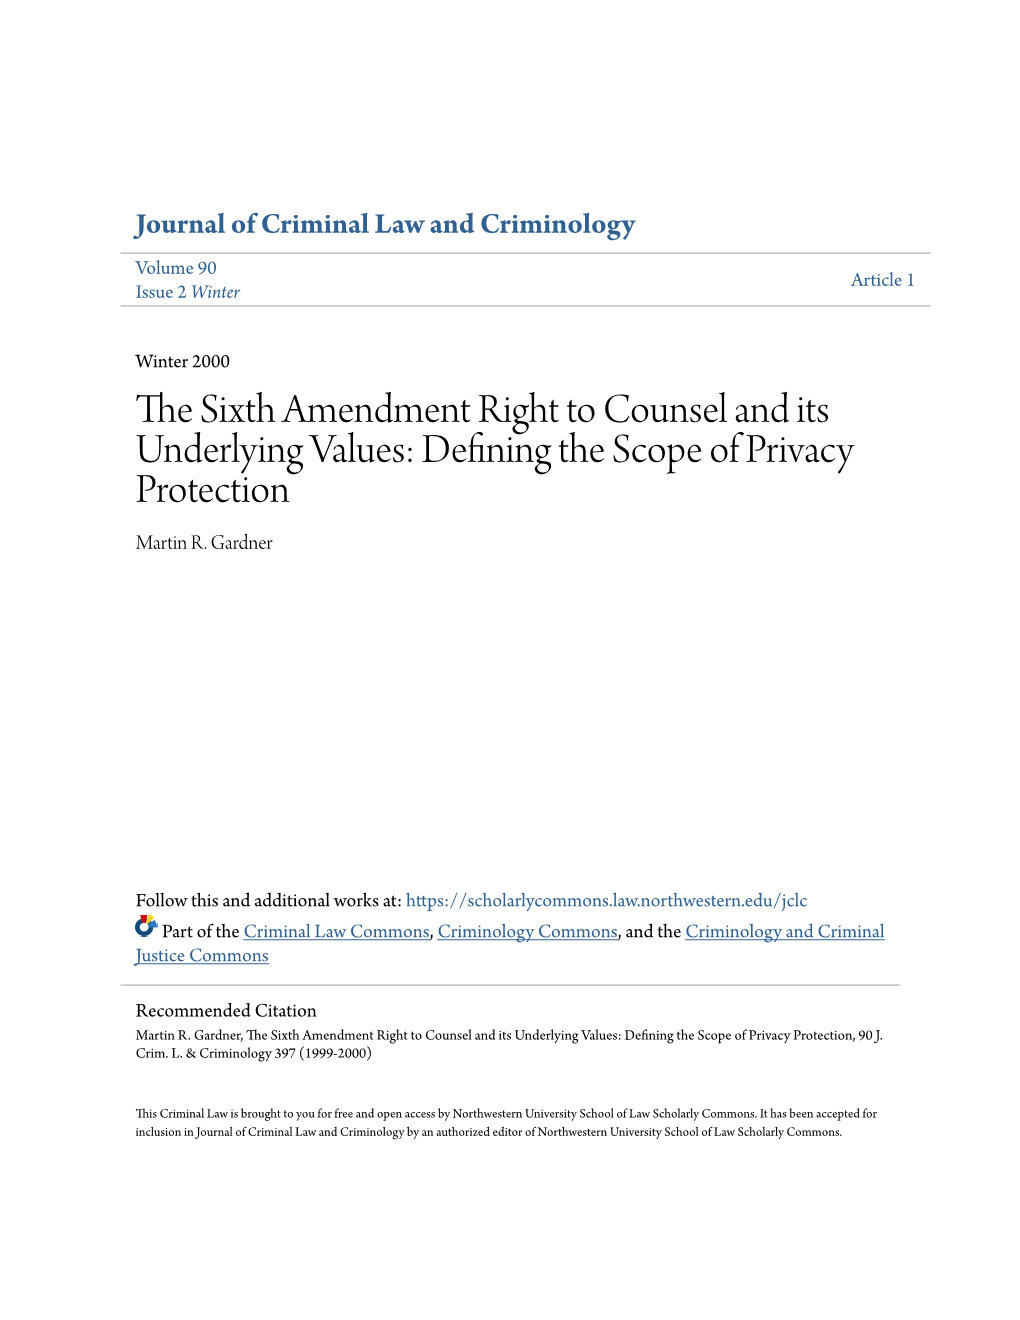 The Sixth Amendment Right to Counsel and Its Underlying Values: Defining the Scope of Privacy Protection